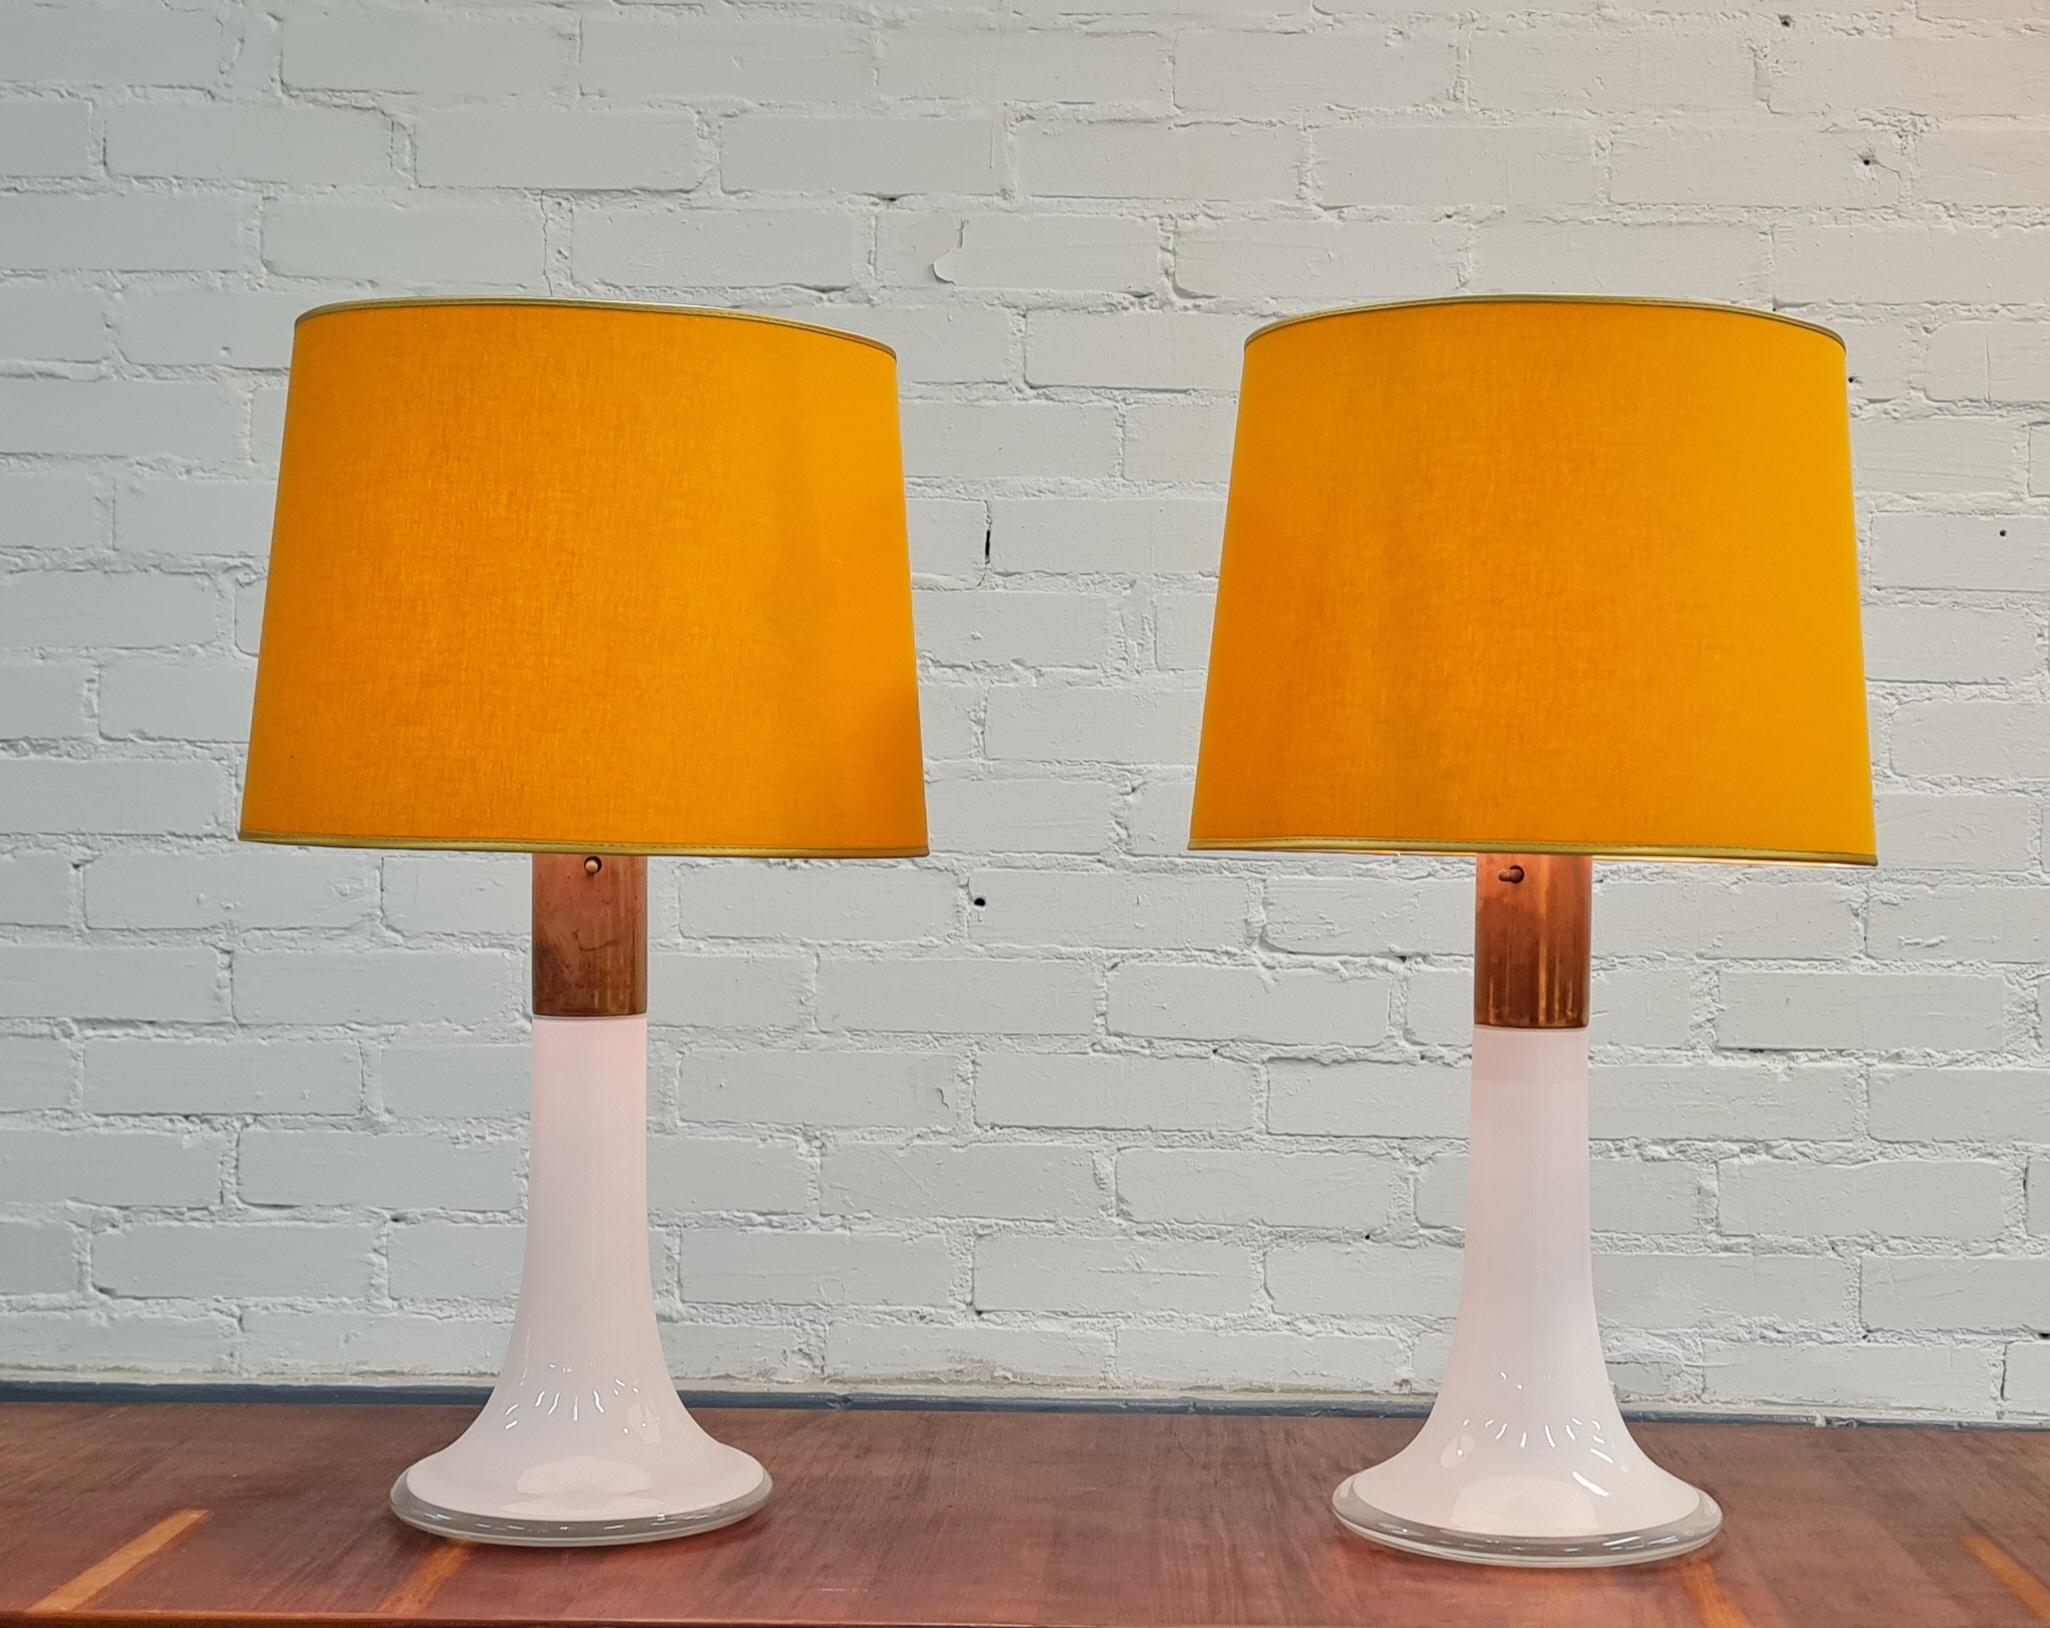 Mid-20th Century Pair of Lisa Johansson-Pape Table Lamps Model 46-017, for Orno